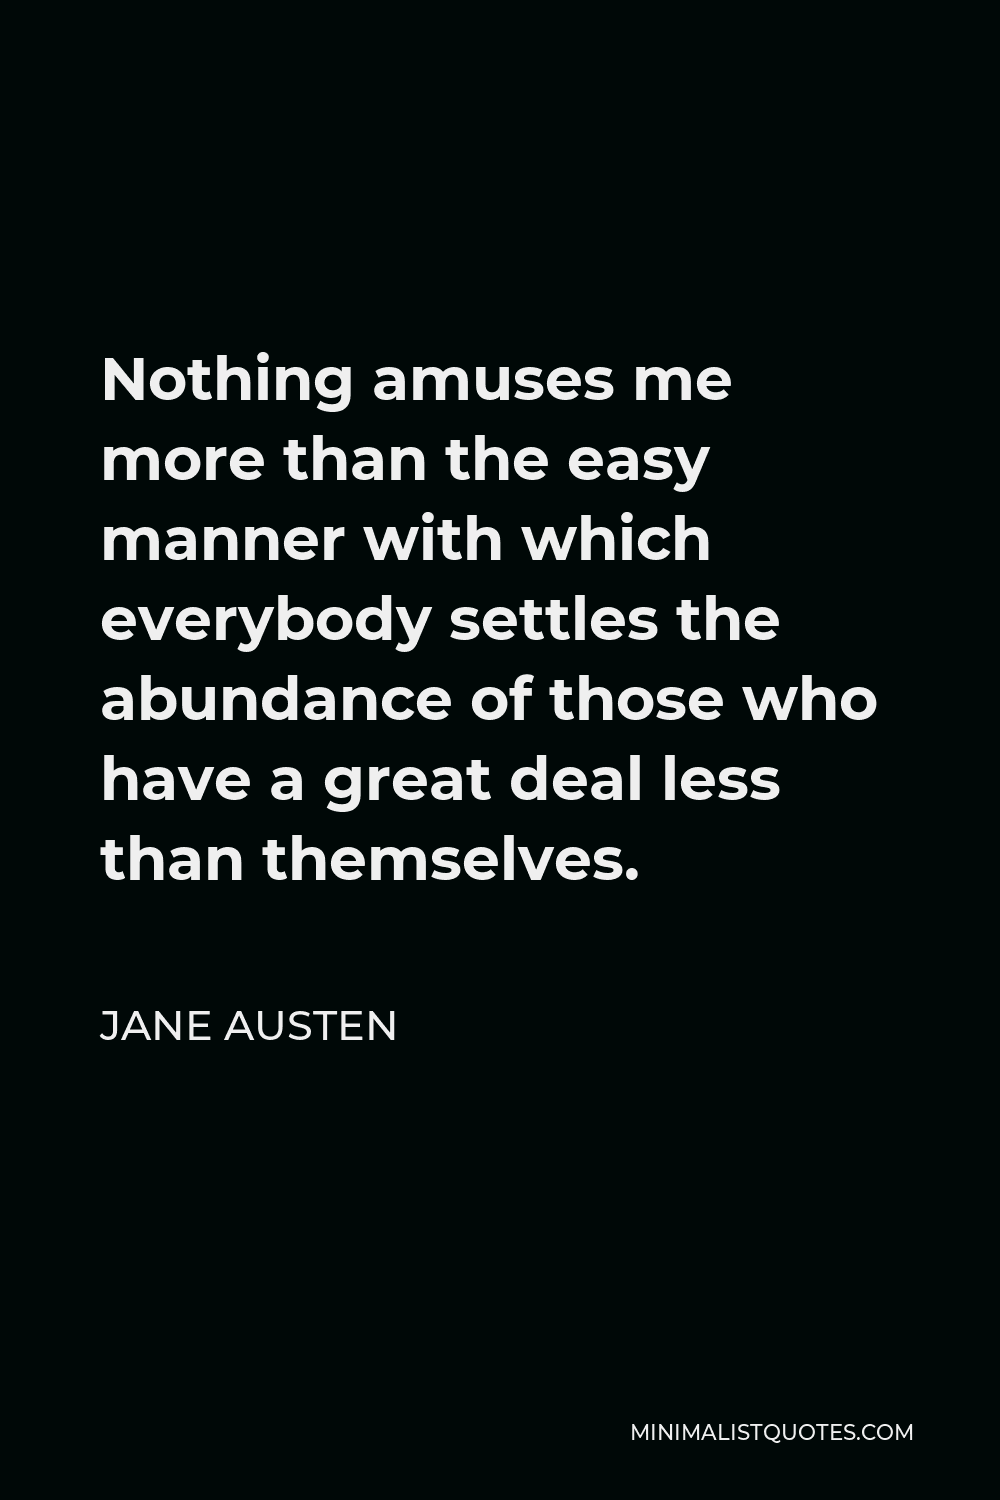 Jane Austen Quote - Nothing amuses me more than the easy manner with which everybody settles the abundance of those who have a great deal less than themselves.